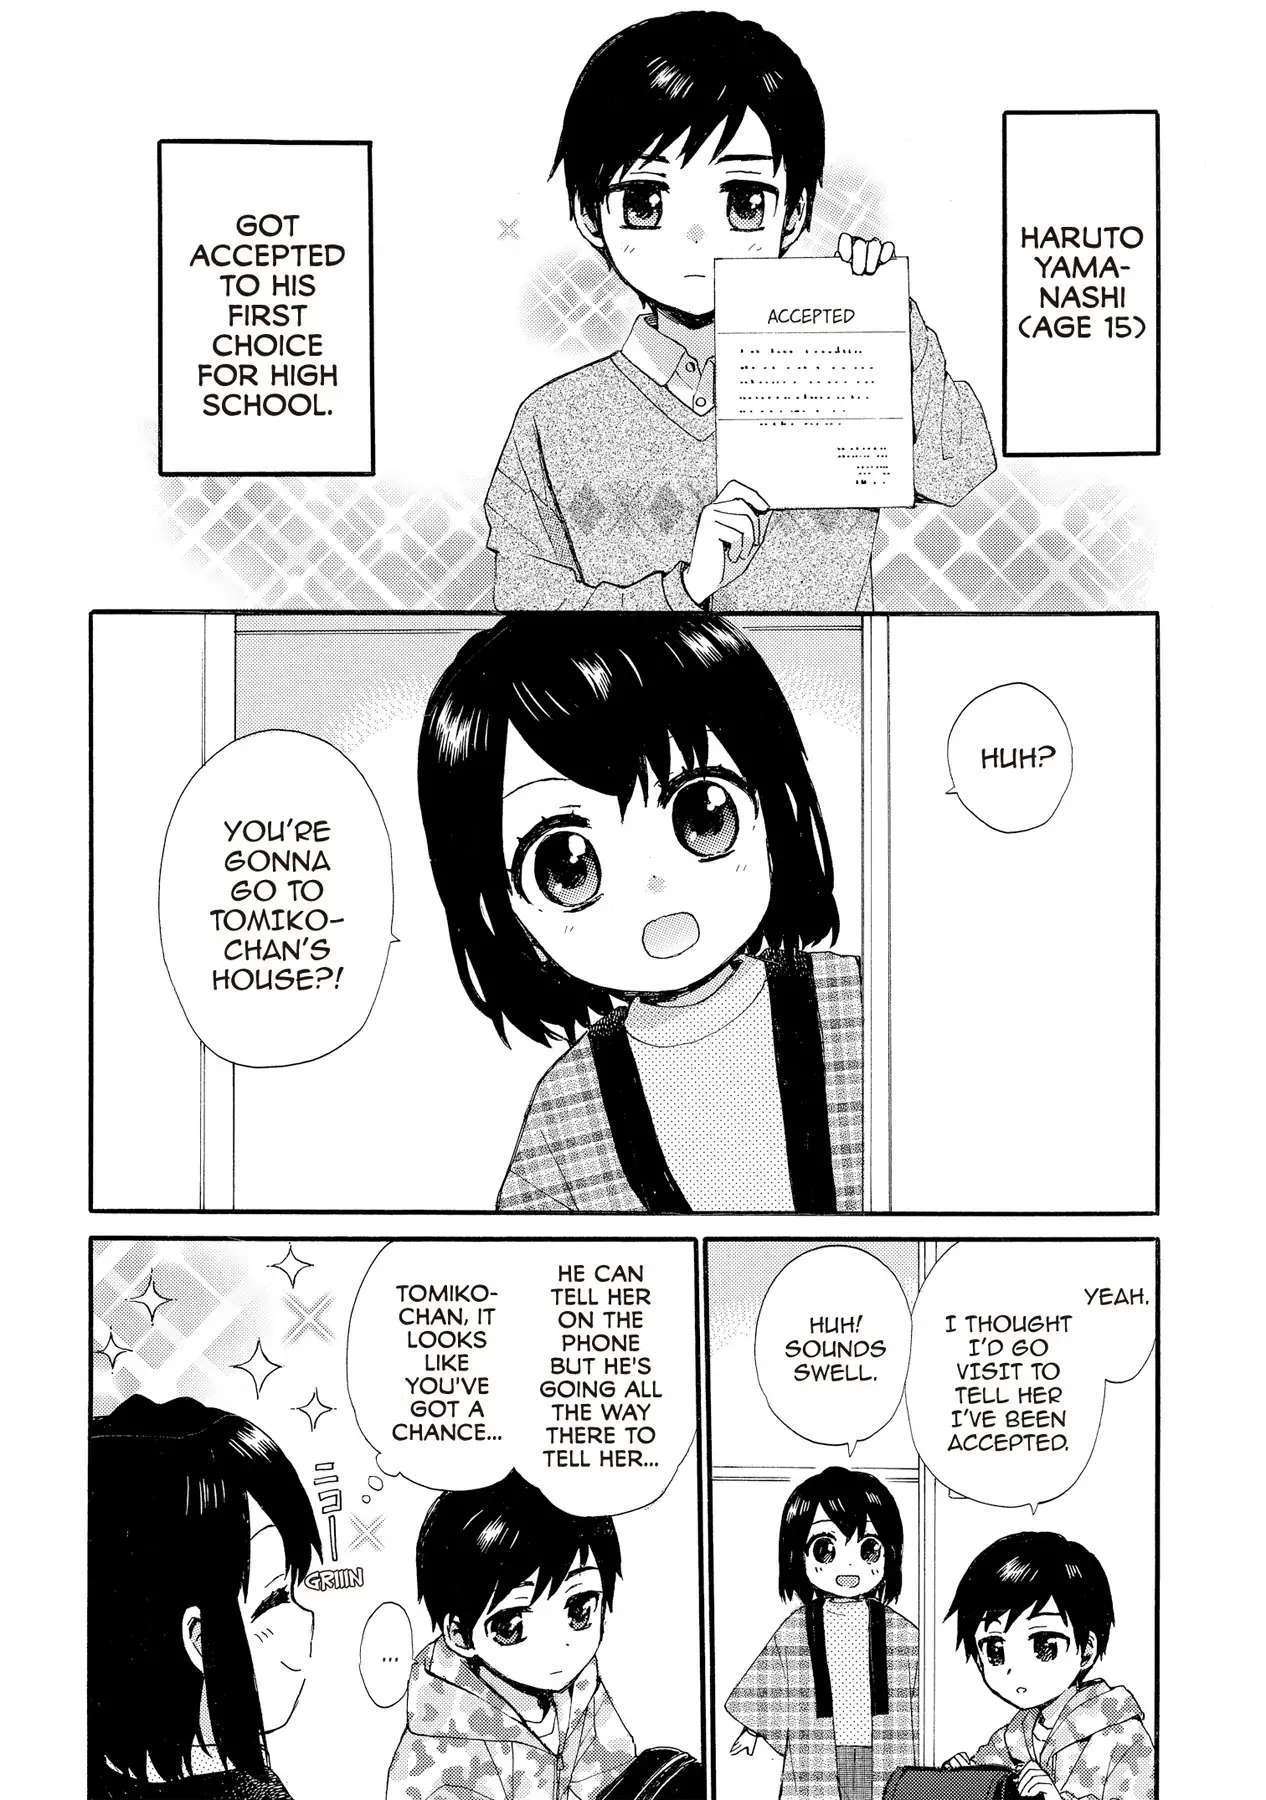 The Cute Little Granny Girl Hinata-chan - chapter 79 - #3